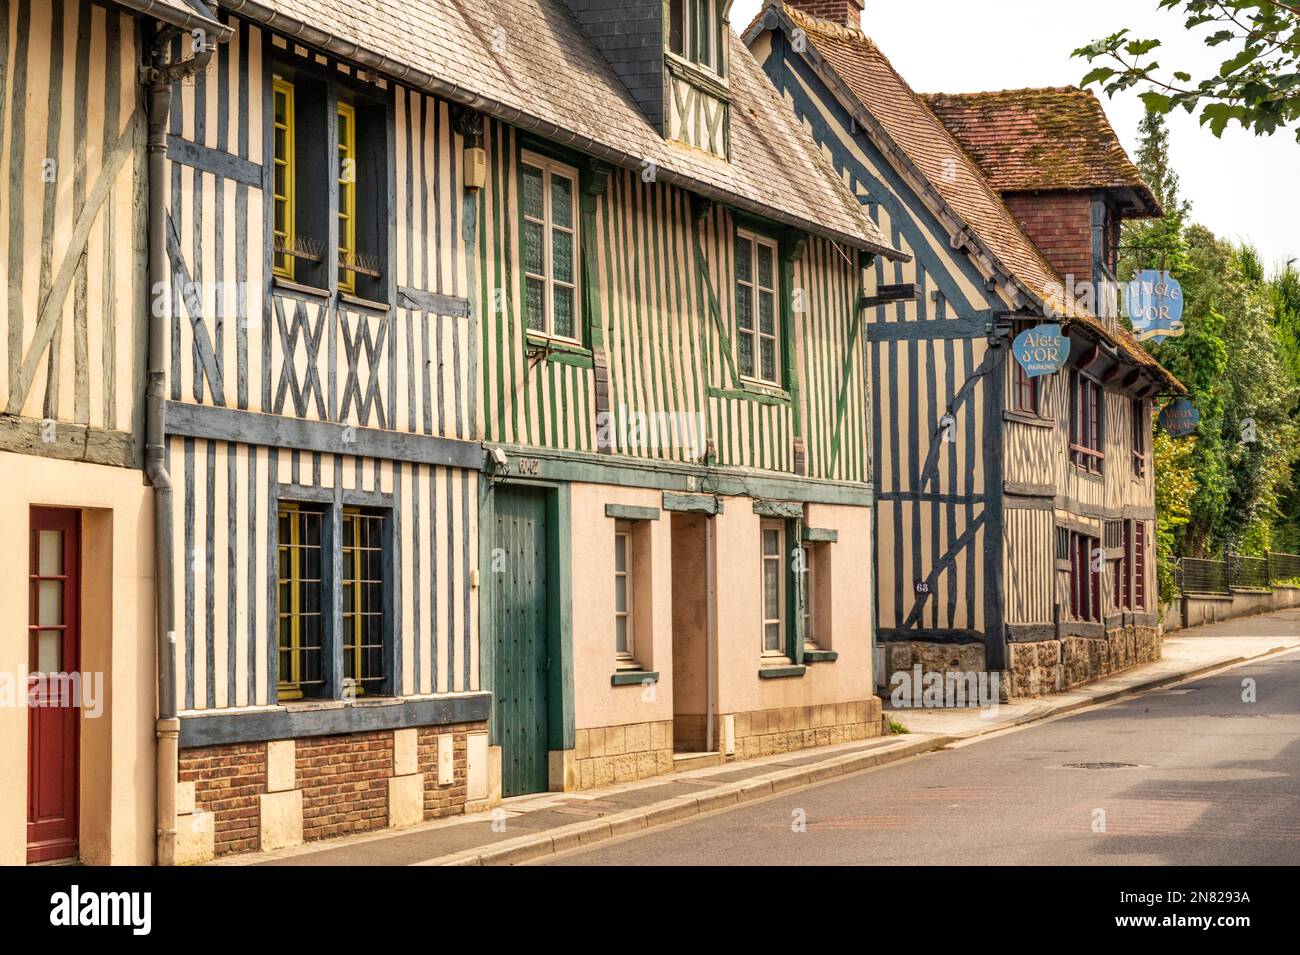 Tradtional medieval facades along the D 675 department road in Pont-l'Évêque, Normandy, France Stock Photo